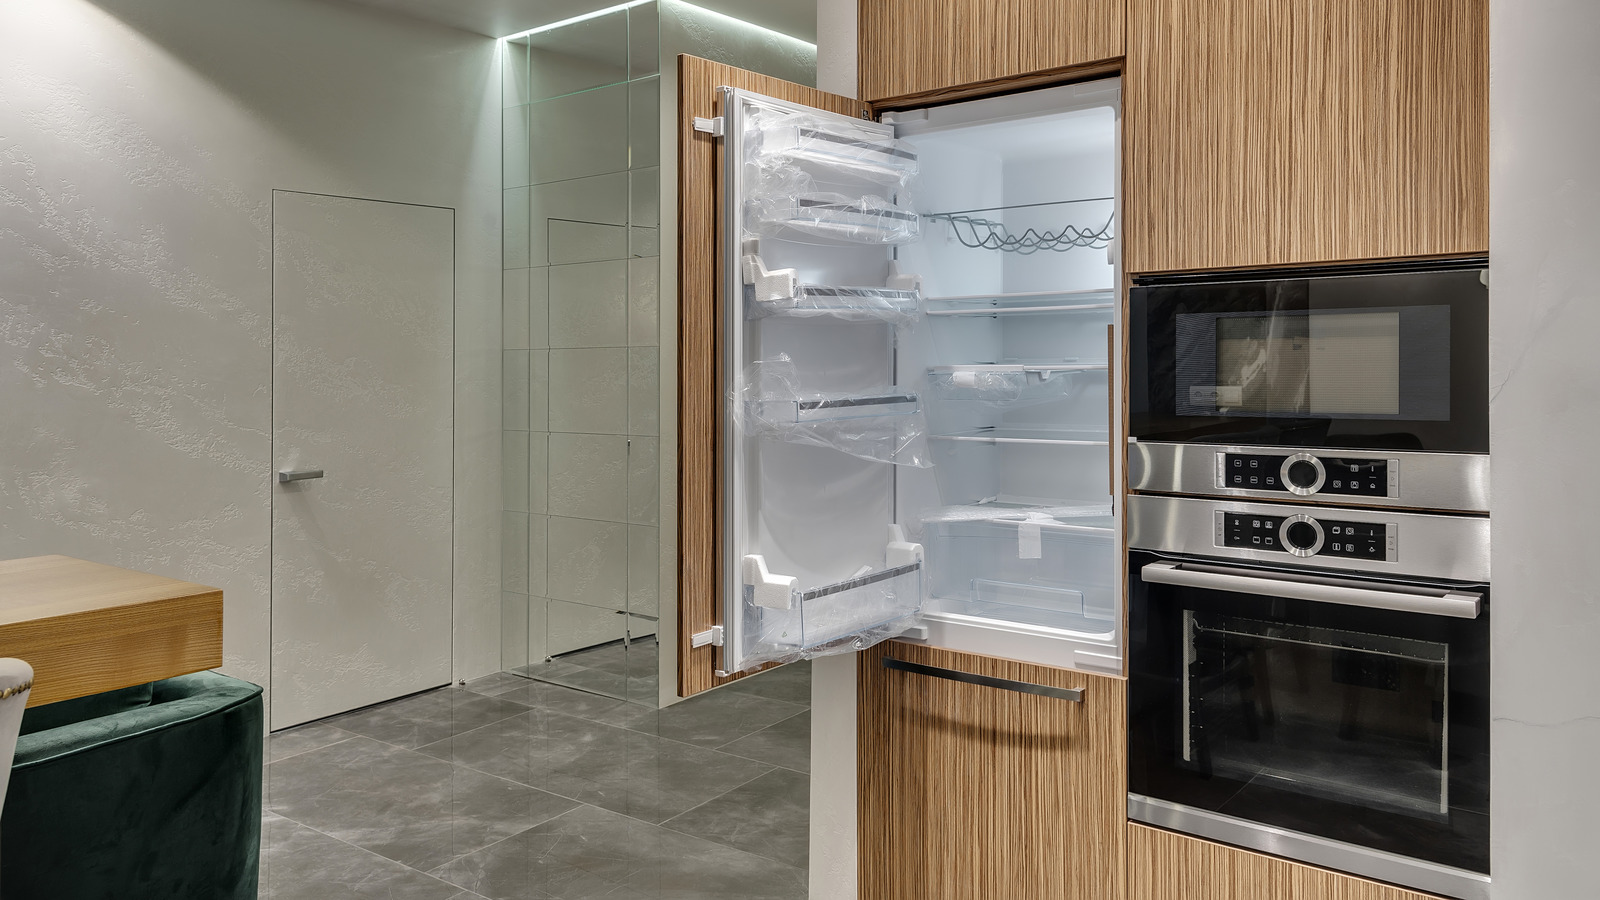 How to Make Appliances a Seamless Part of Your Kitchen Design